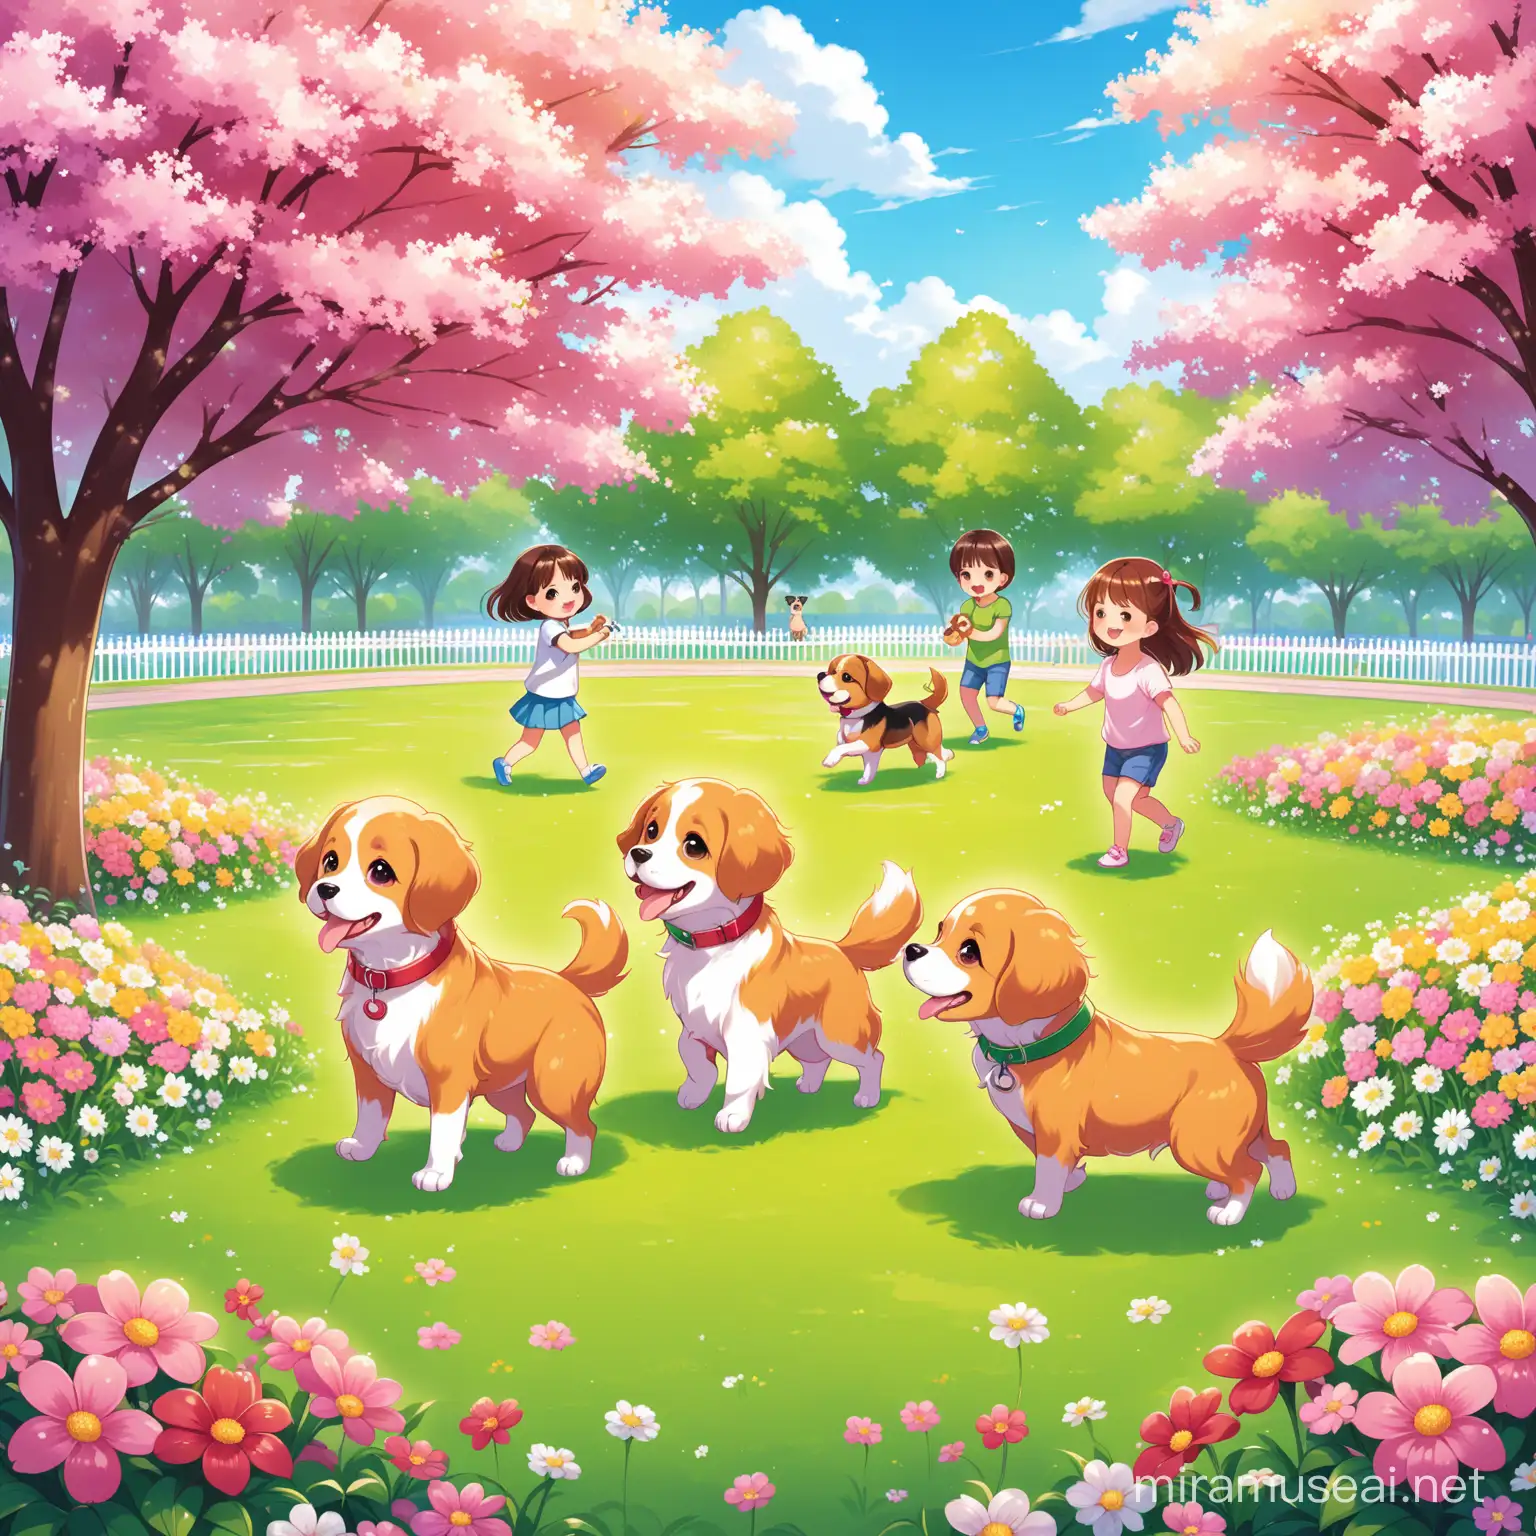 Can you create a picture with three cute dogs in a park. The park is full of flowers and children playing.